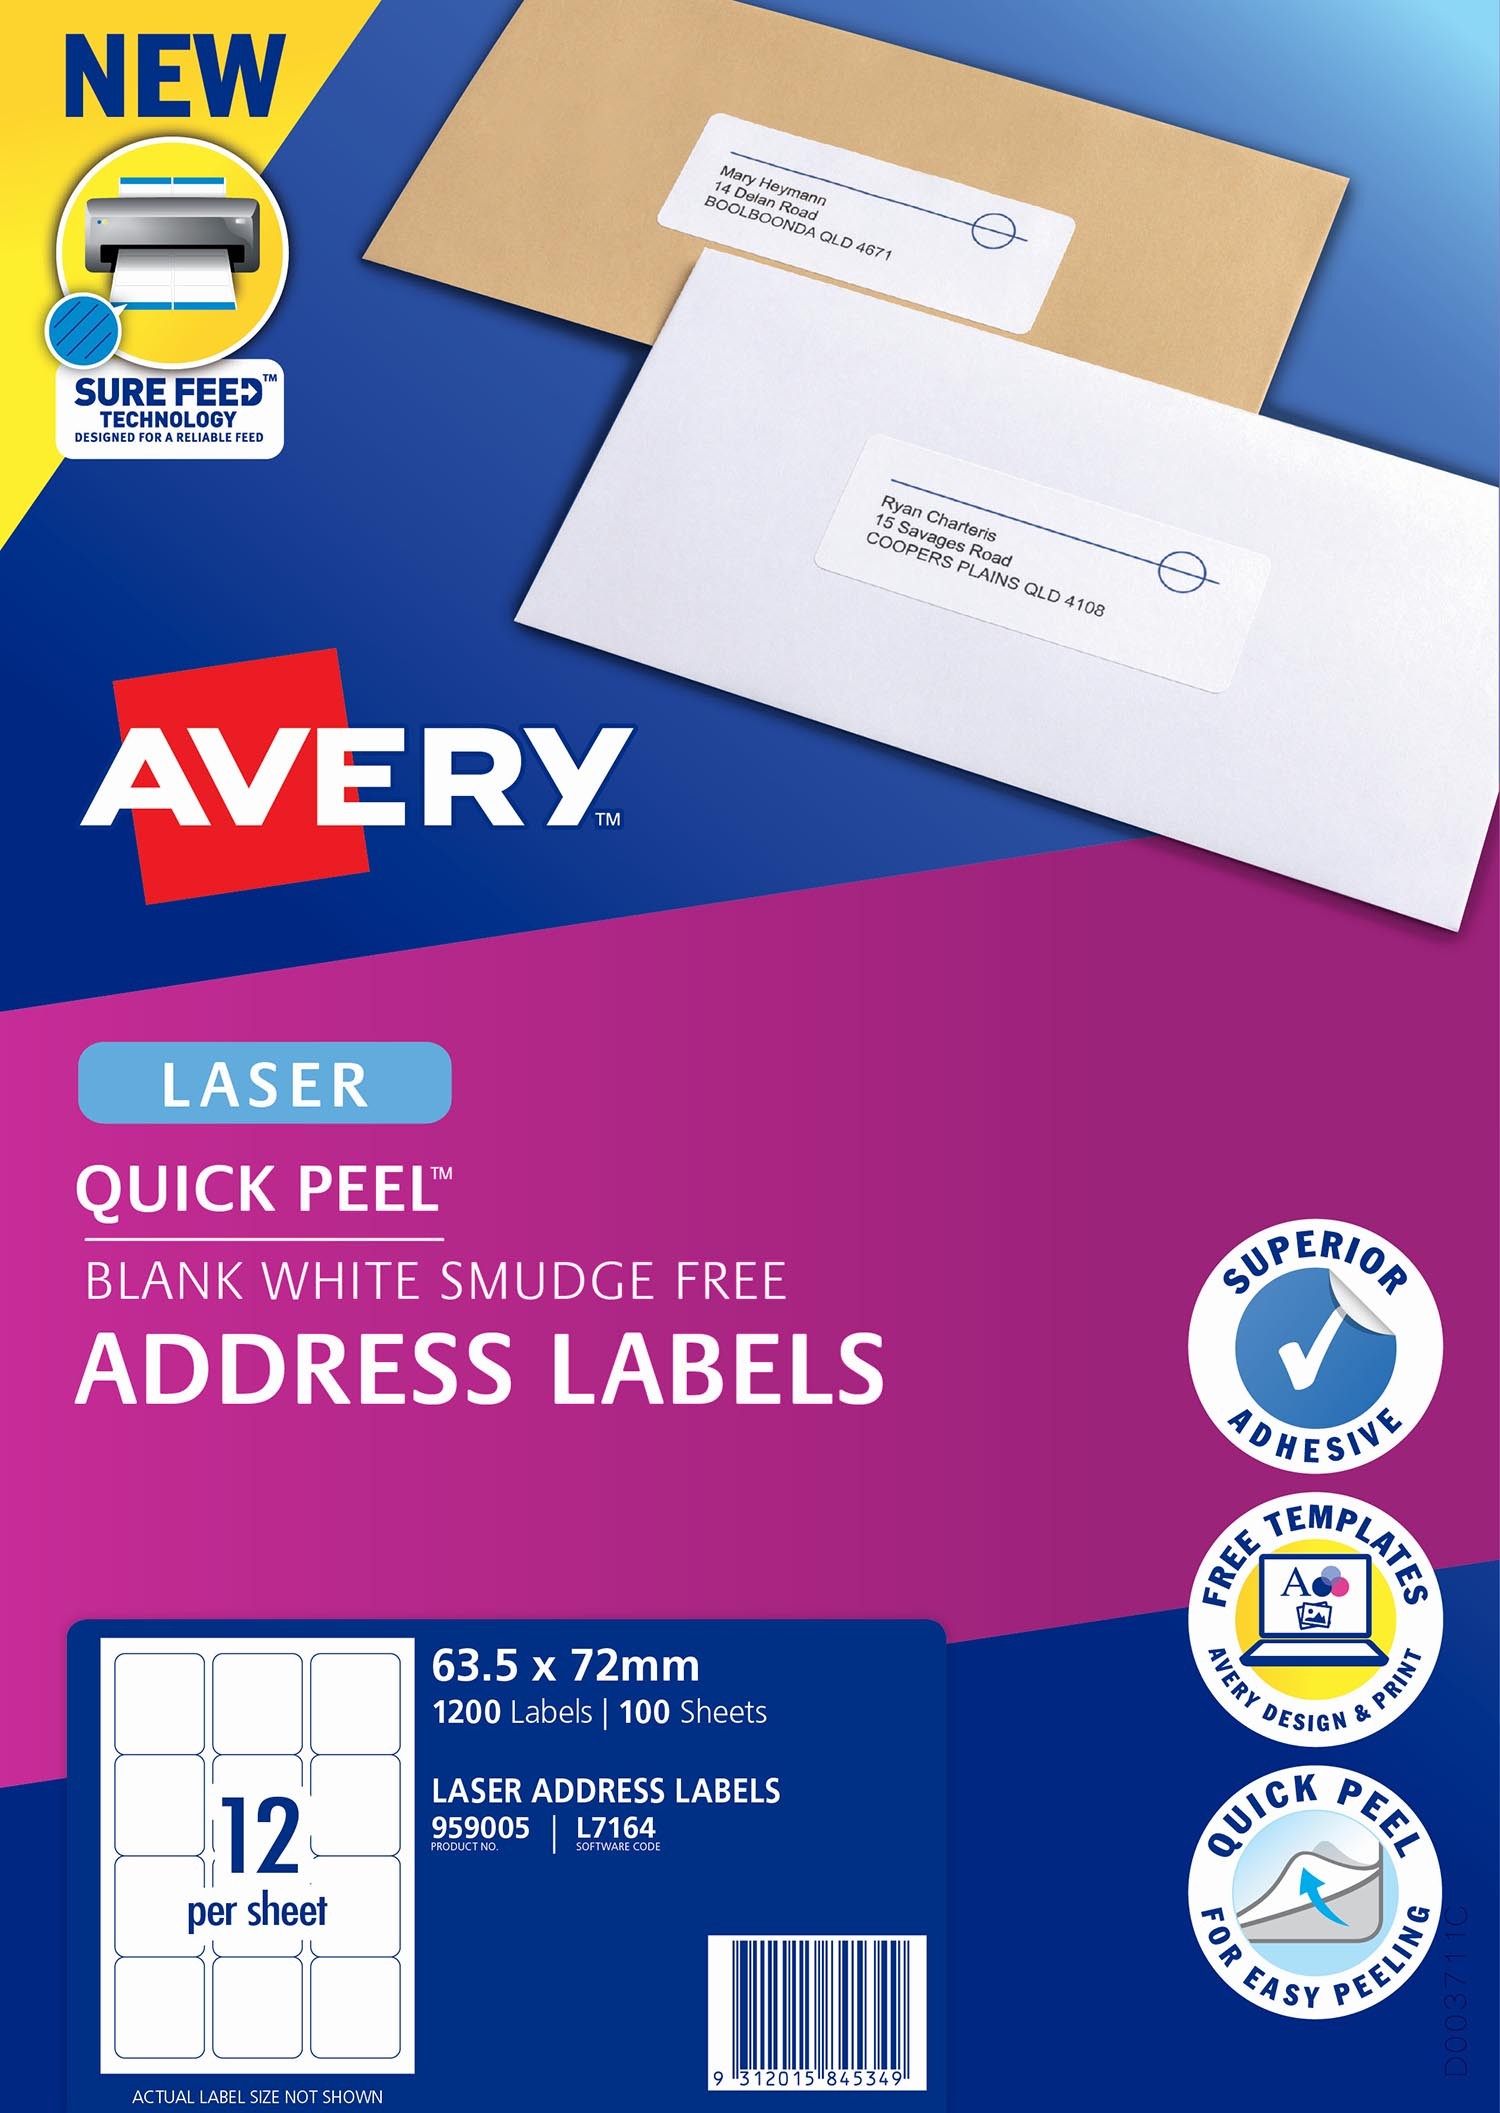 avery-labels-template-free-avery-round-label-template-shatterlion